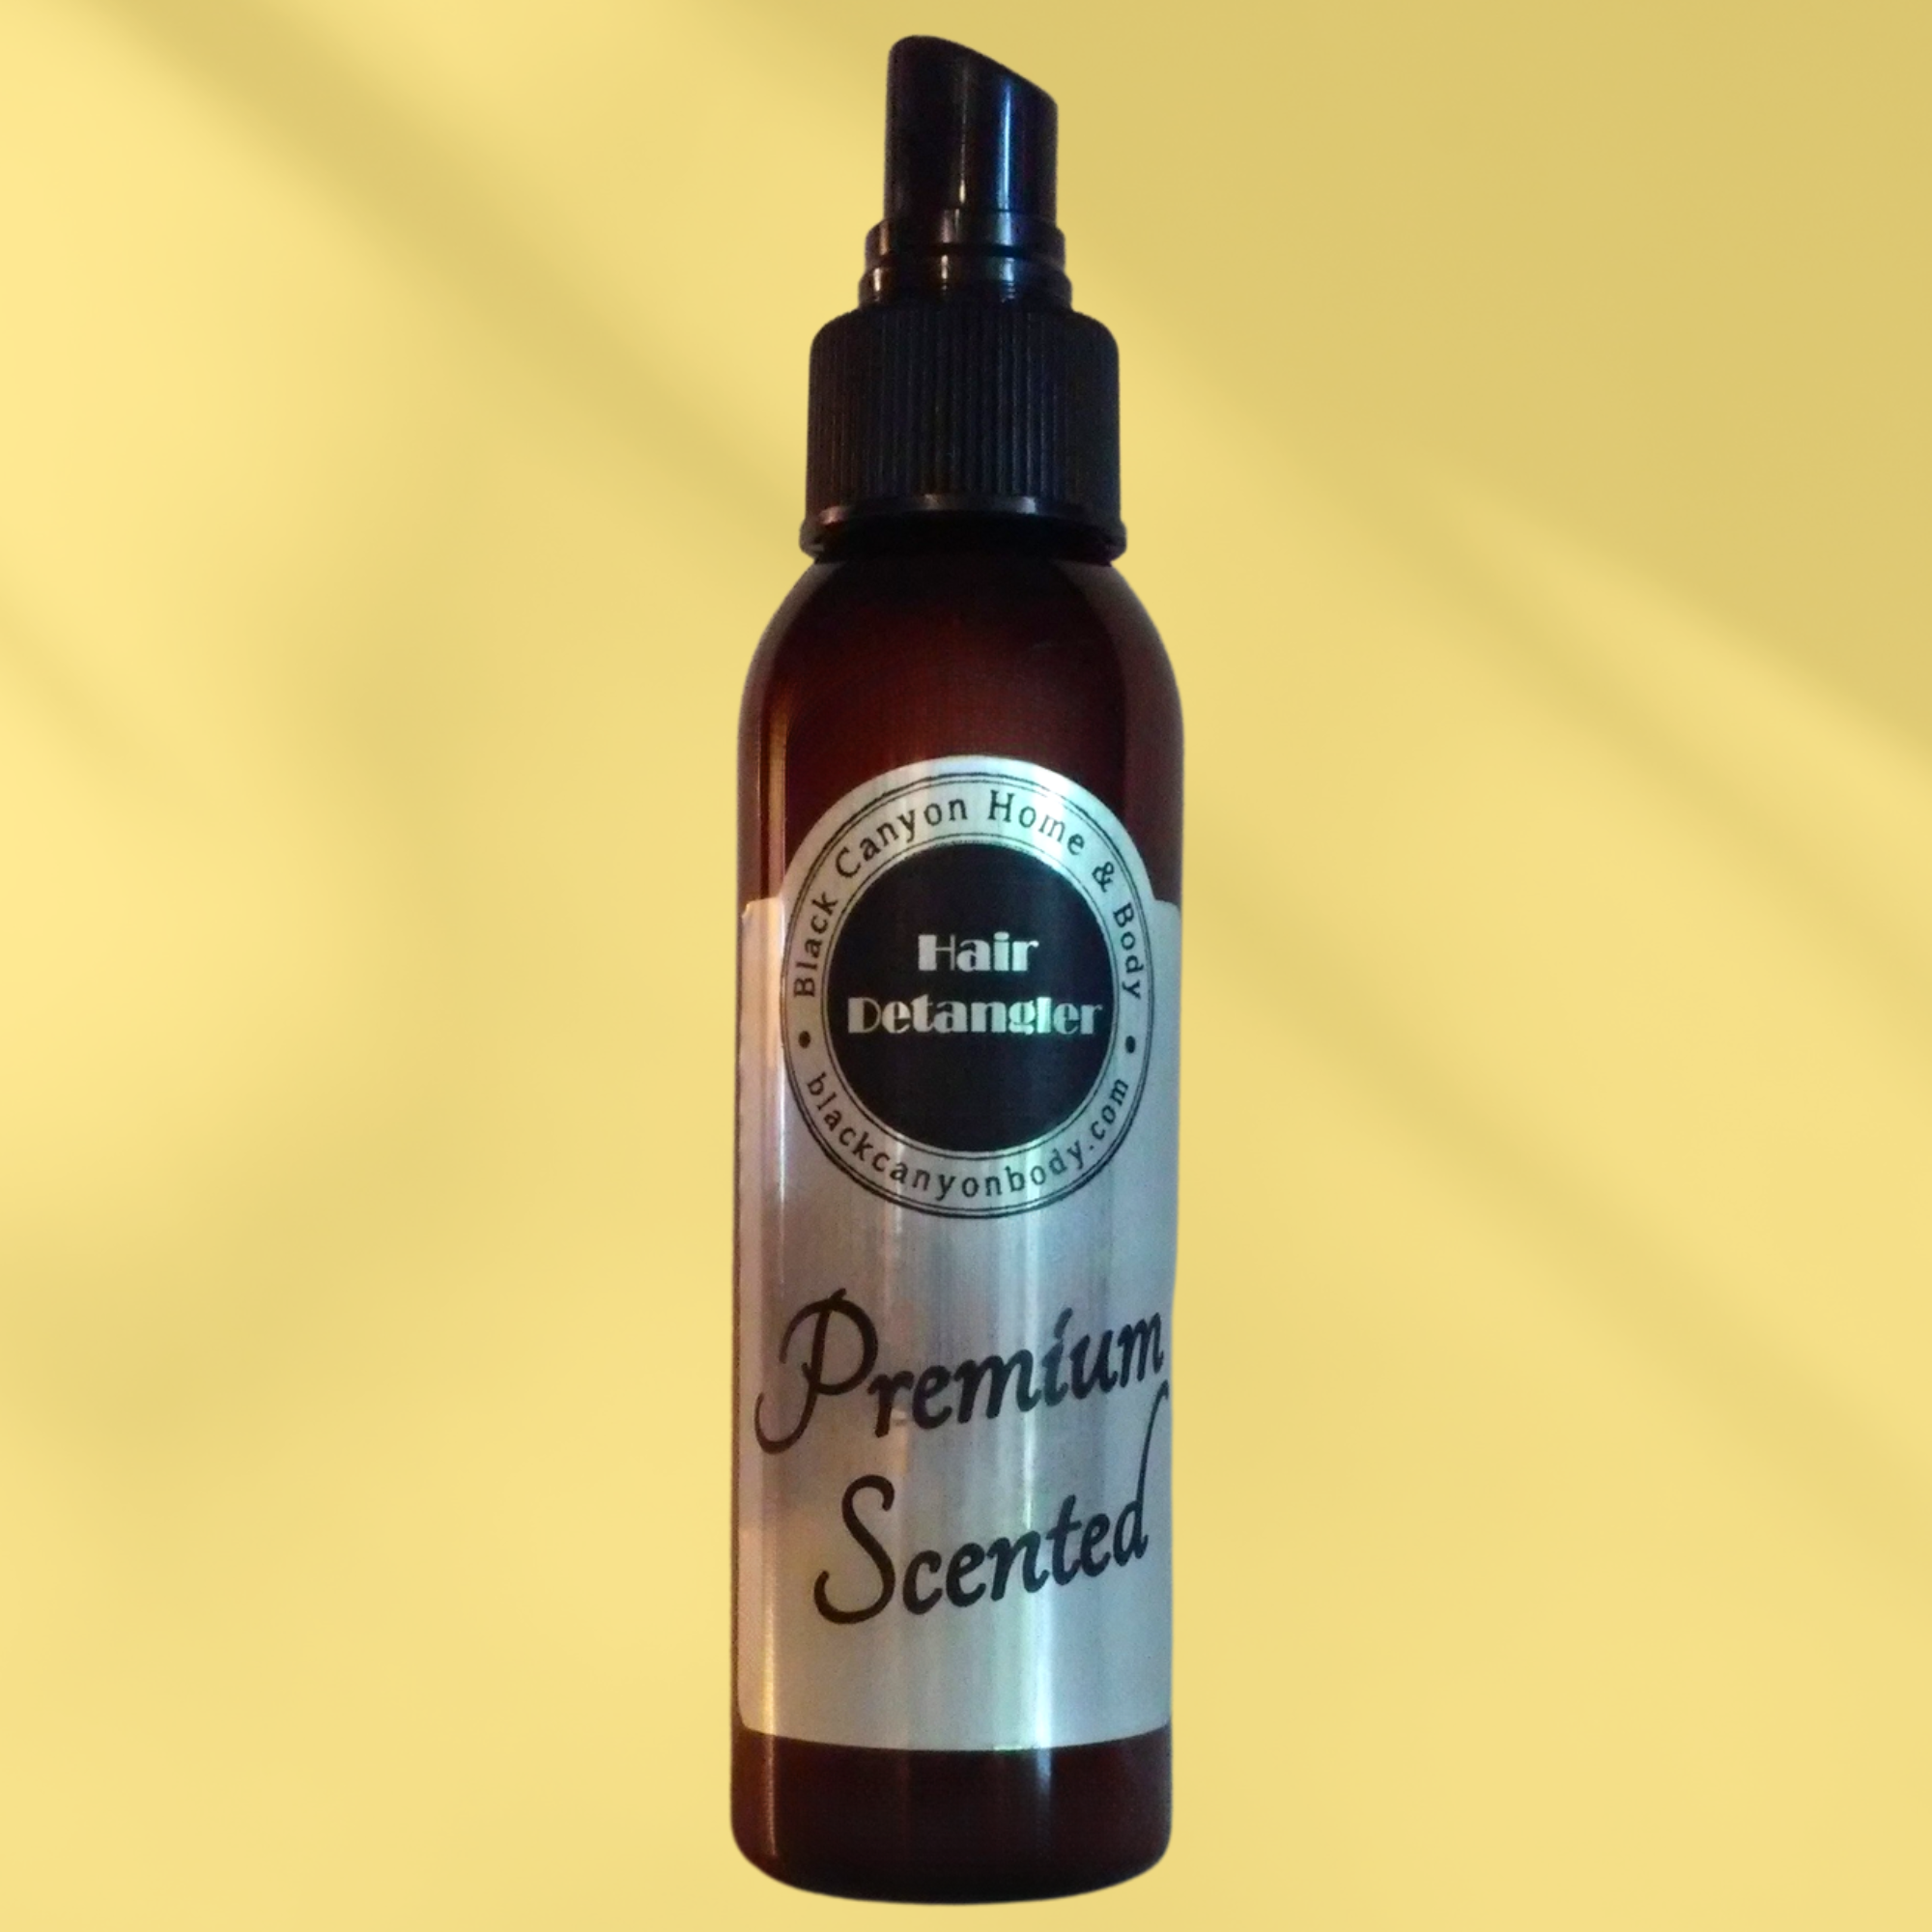 Black Canyon Spiced Plum Scented Hair Detangler Spray with Olive Oil